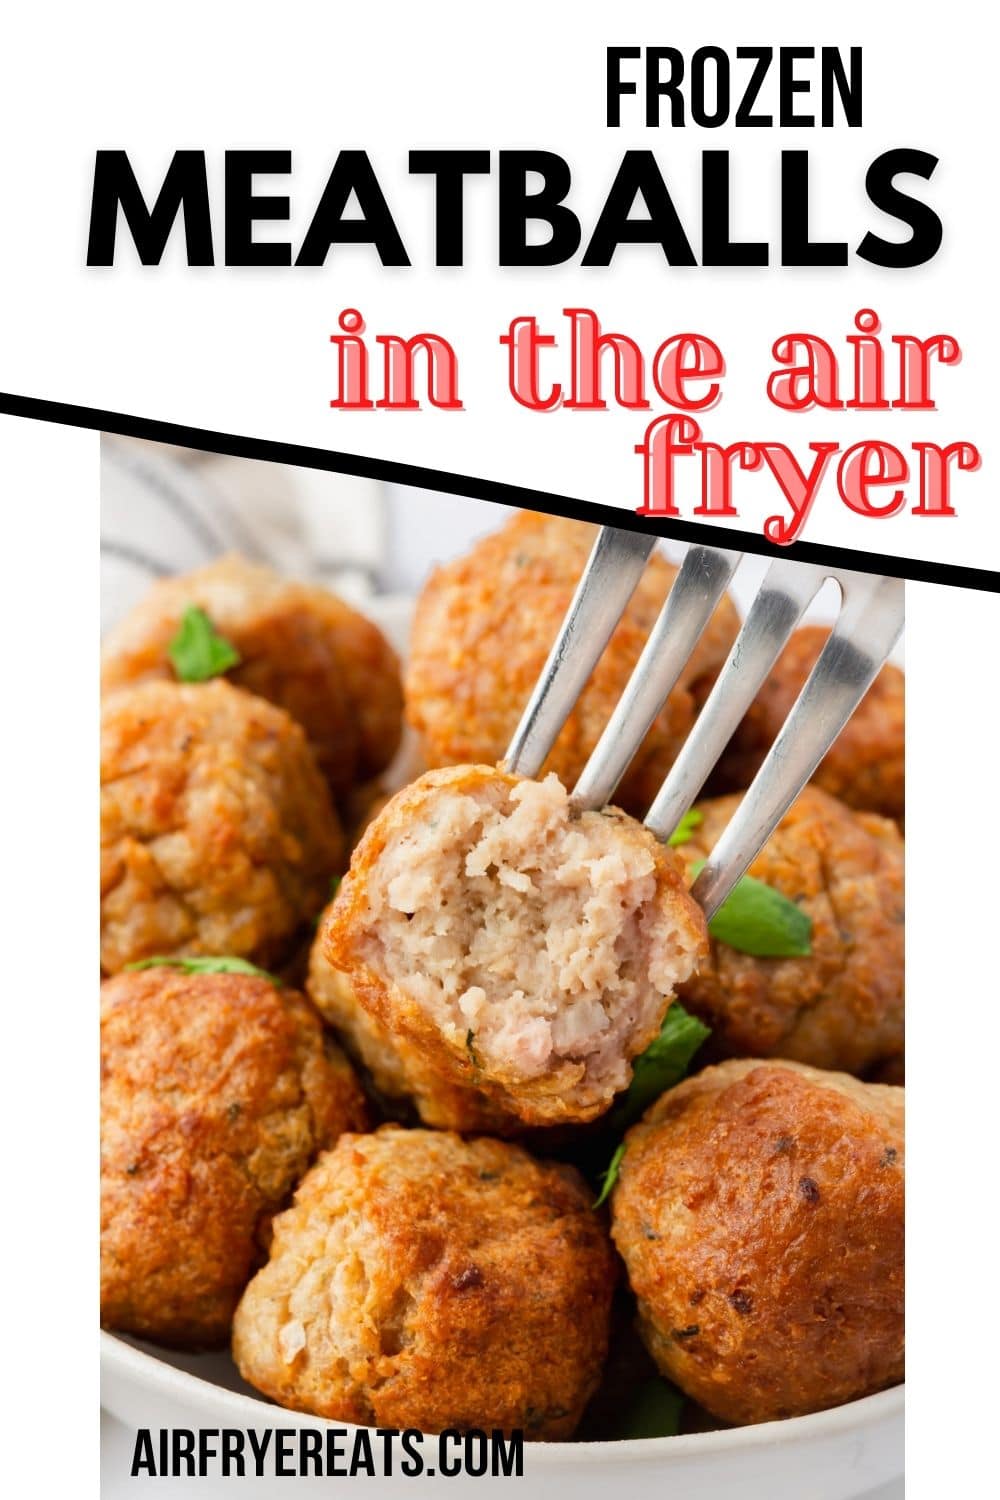 Frozen meatballs of any variety can be cooked in the air fryer in under 15 minutes. Just throw frozen meatballs in the air fryer, then toss them with your favorite pasta sauce or serve them as an easy appetizer - everyone will love them! via @vegetarianmamma